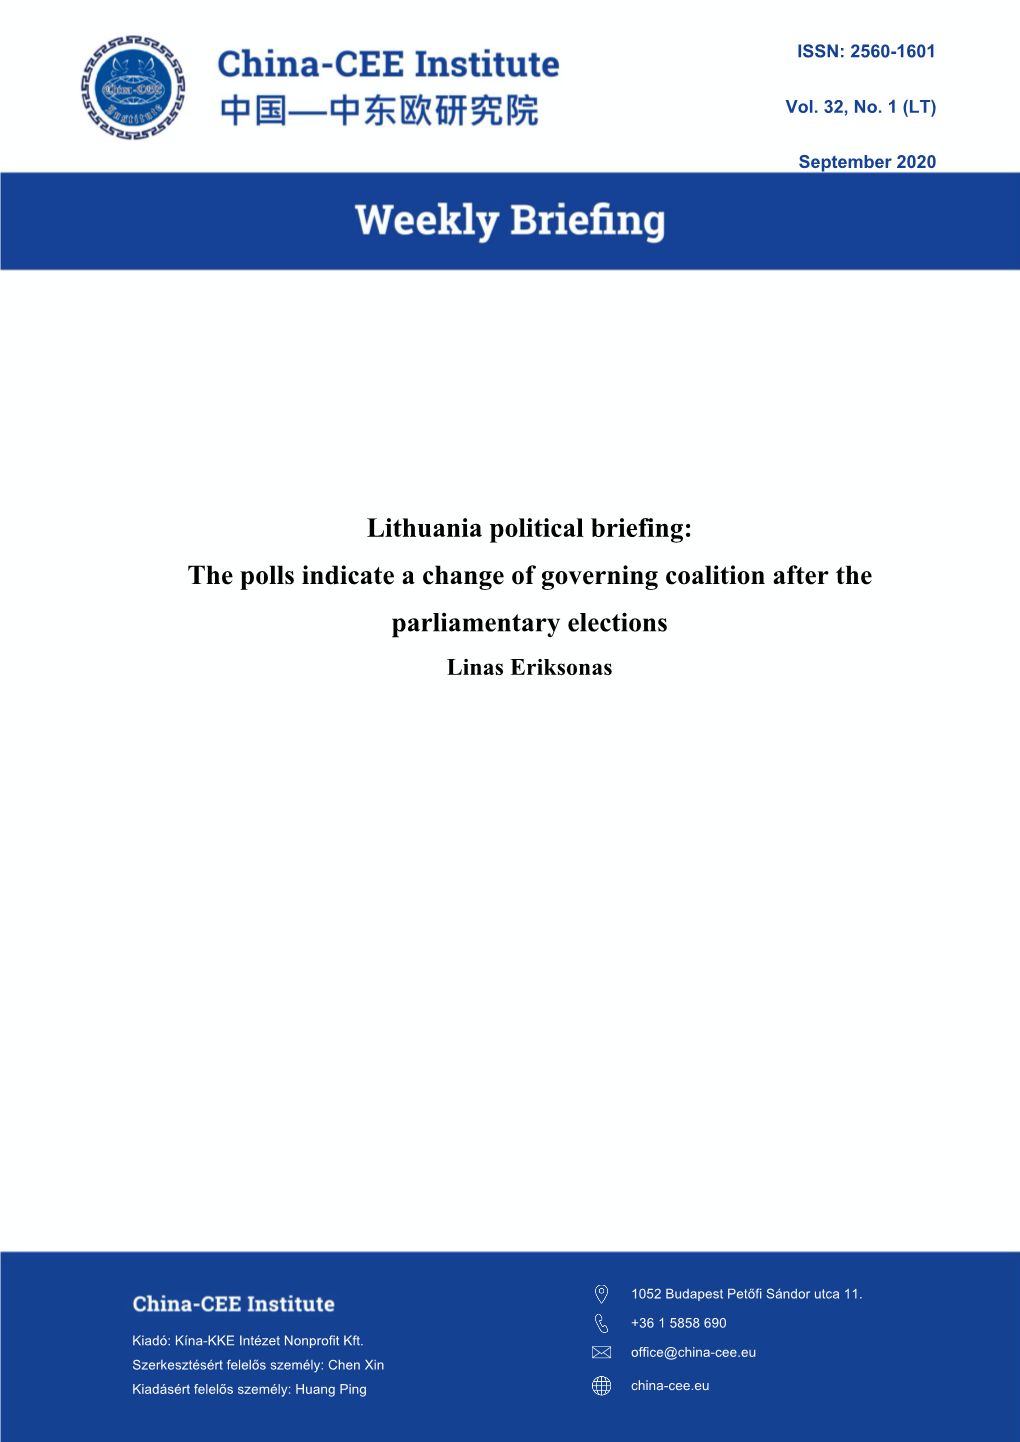 Lithuania Political Briefing: the Polls Indicate a Change of Governing Coalition After the Parliamentary Elections Linas Eriksonas